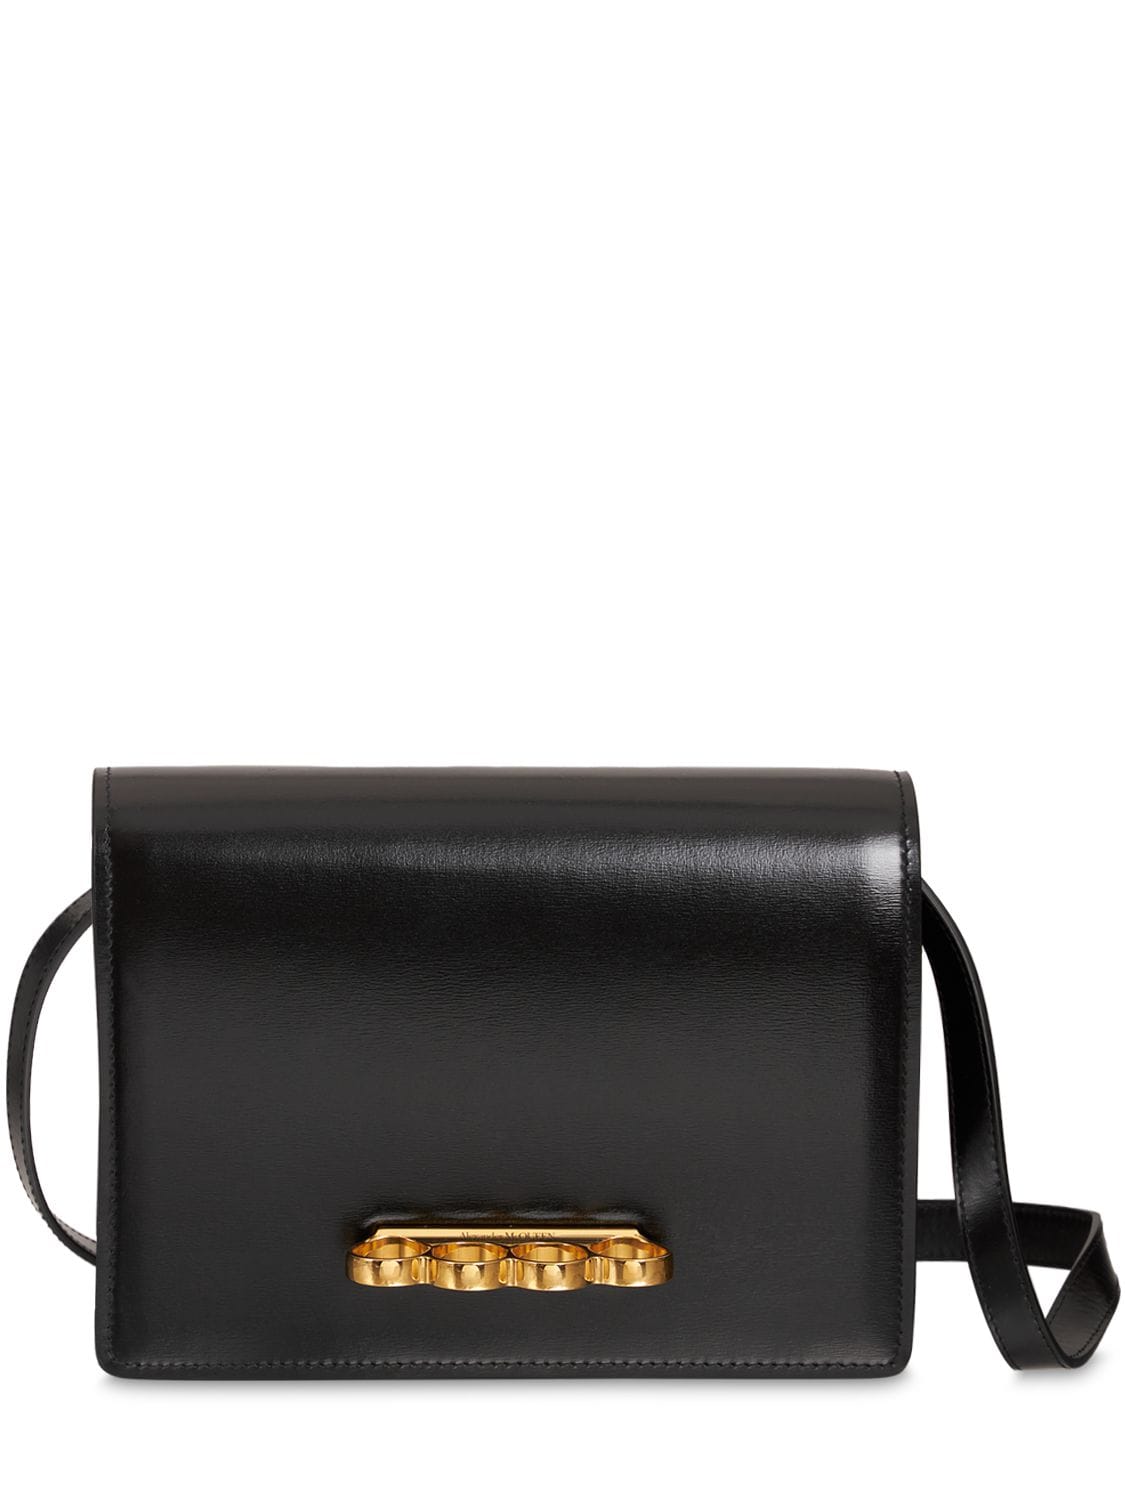 ALEXANDER MCQUEEN The Four Ring Leather Satchel